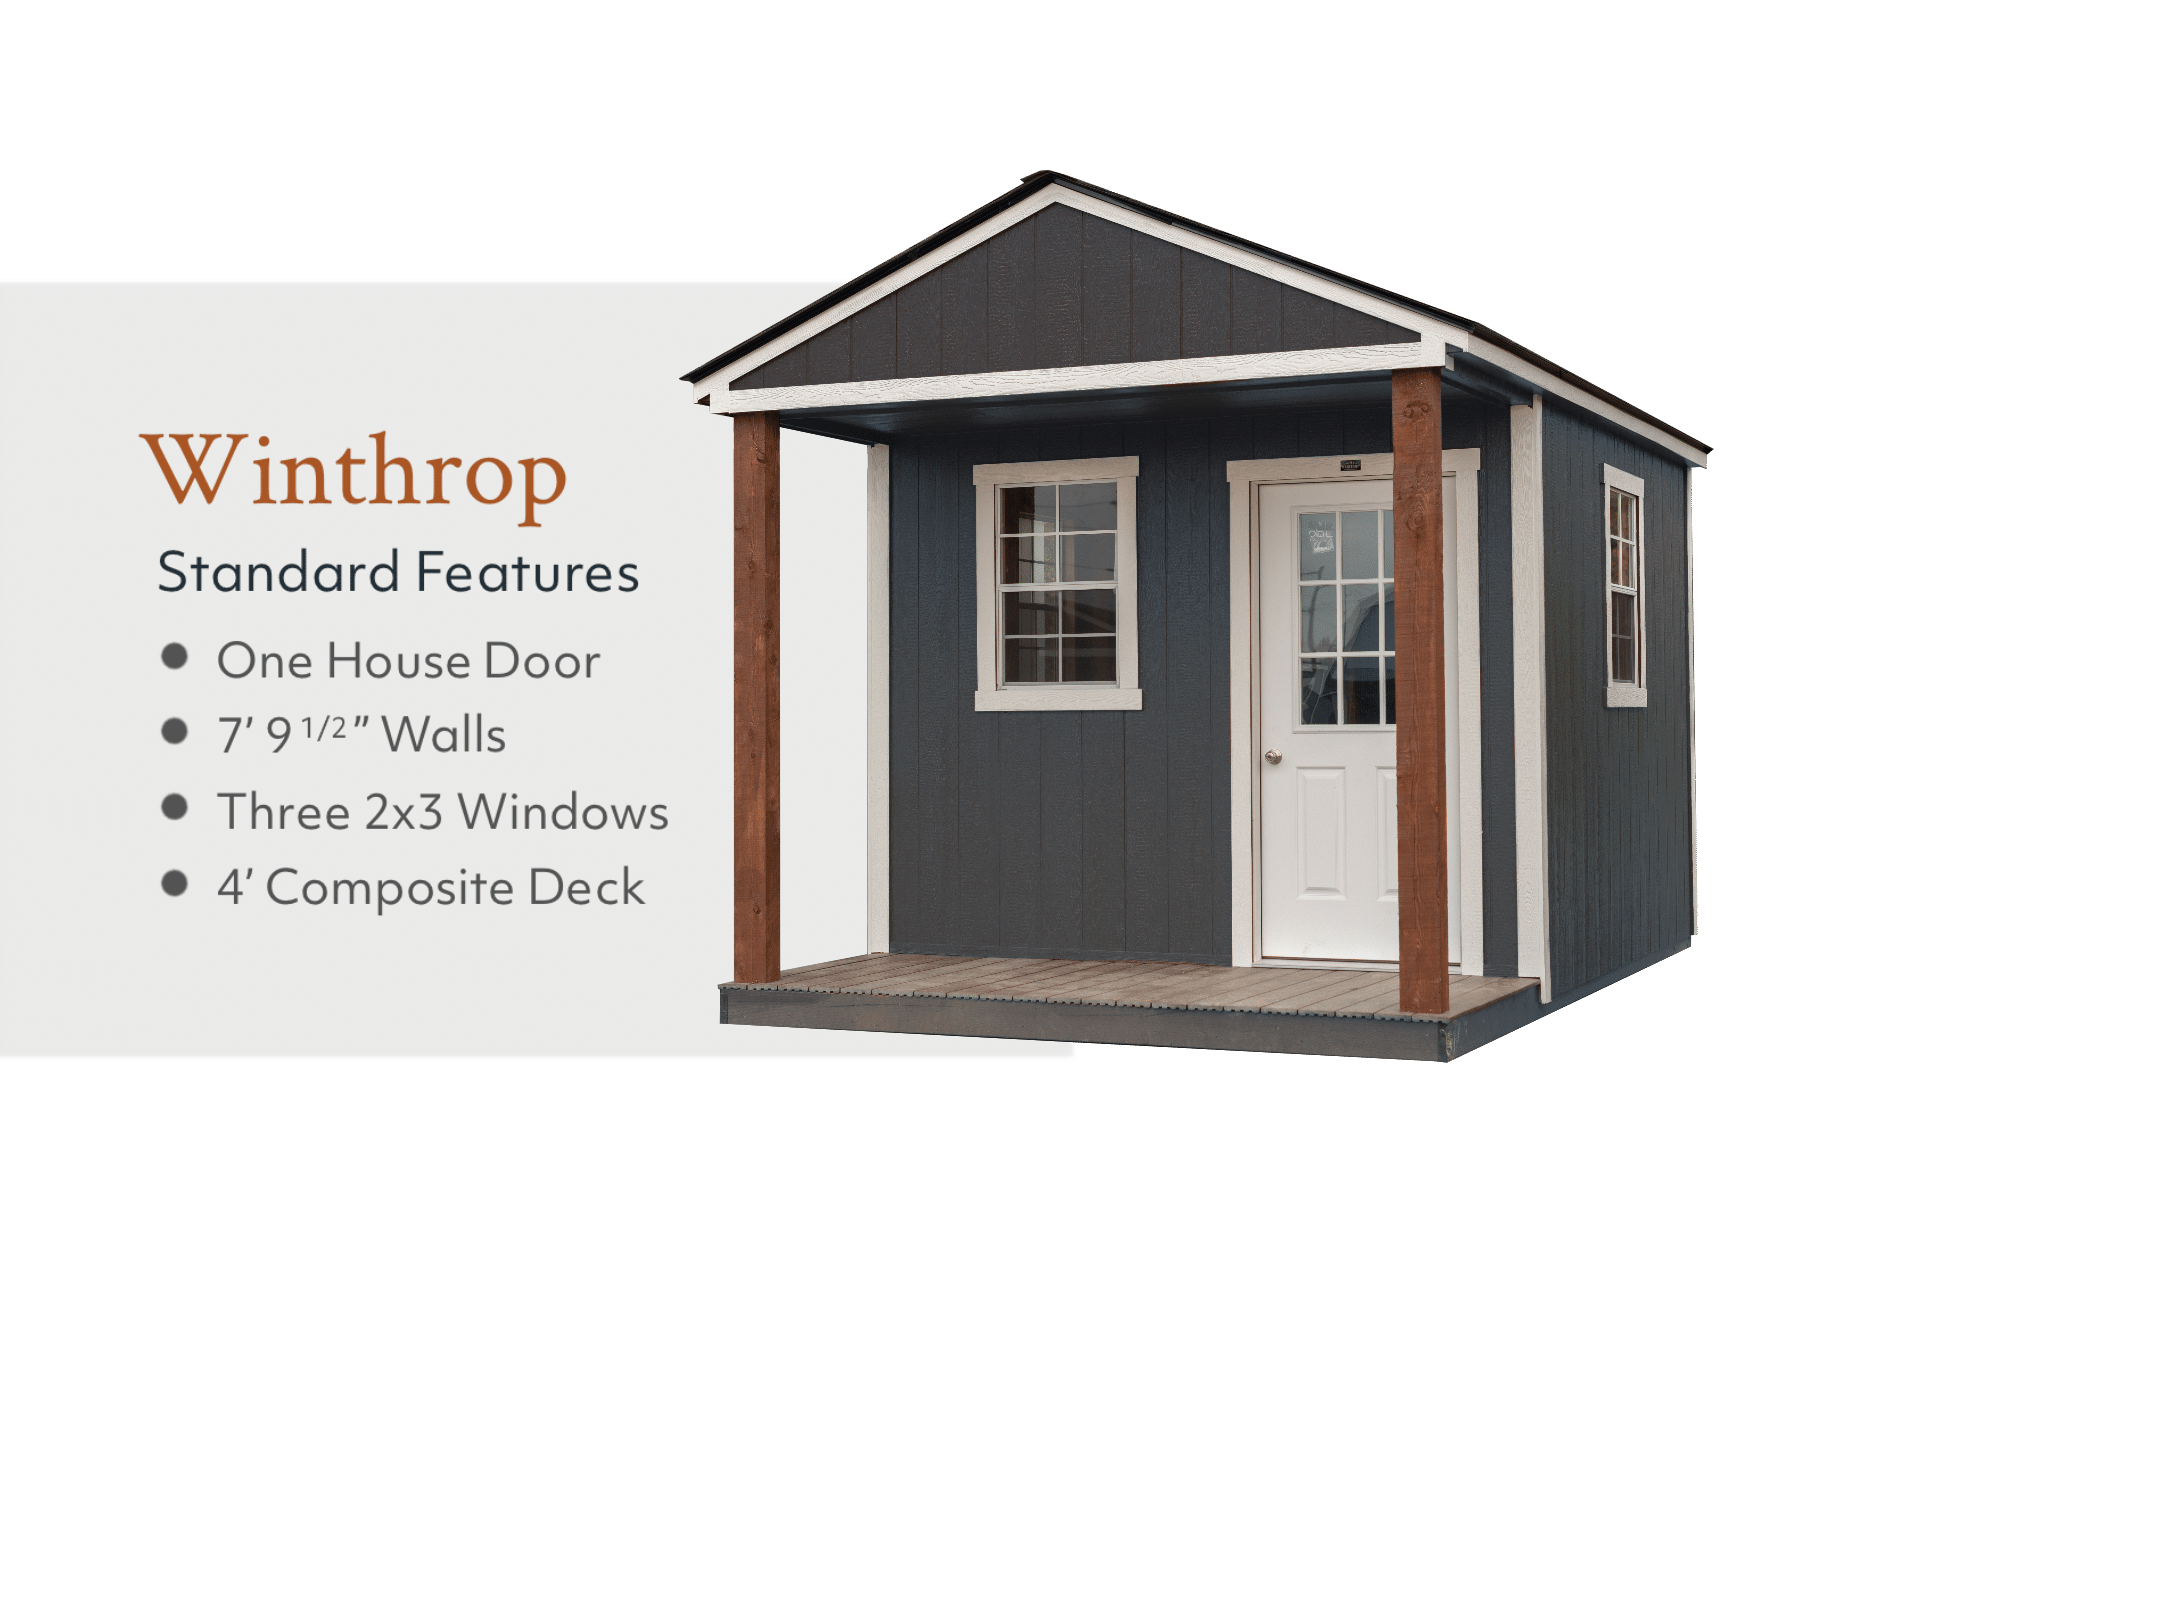 The Winthrop | Heritage Portable Buildings